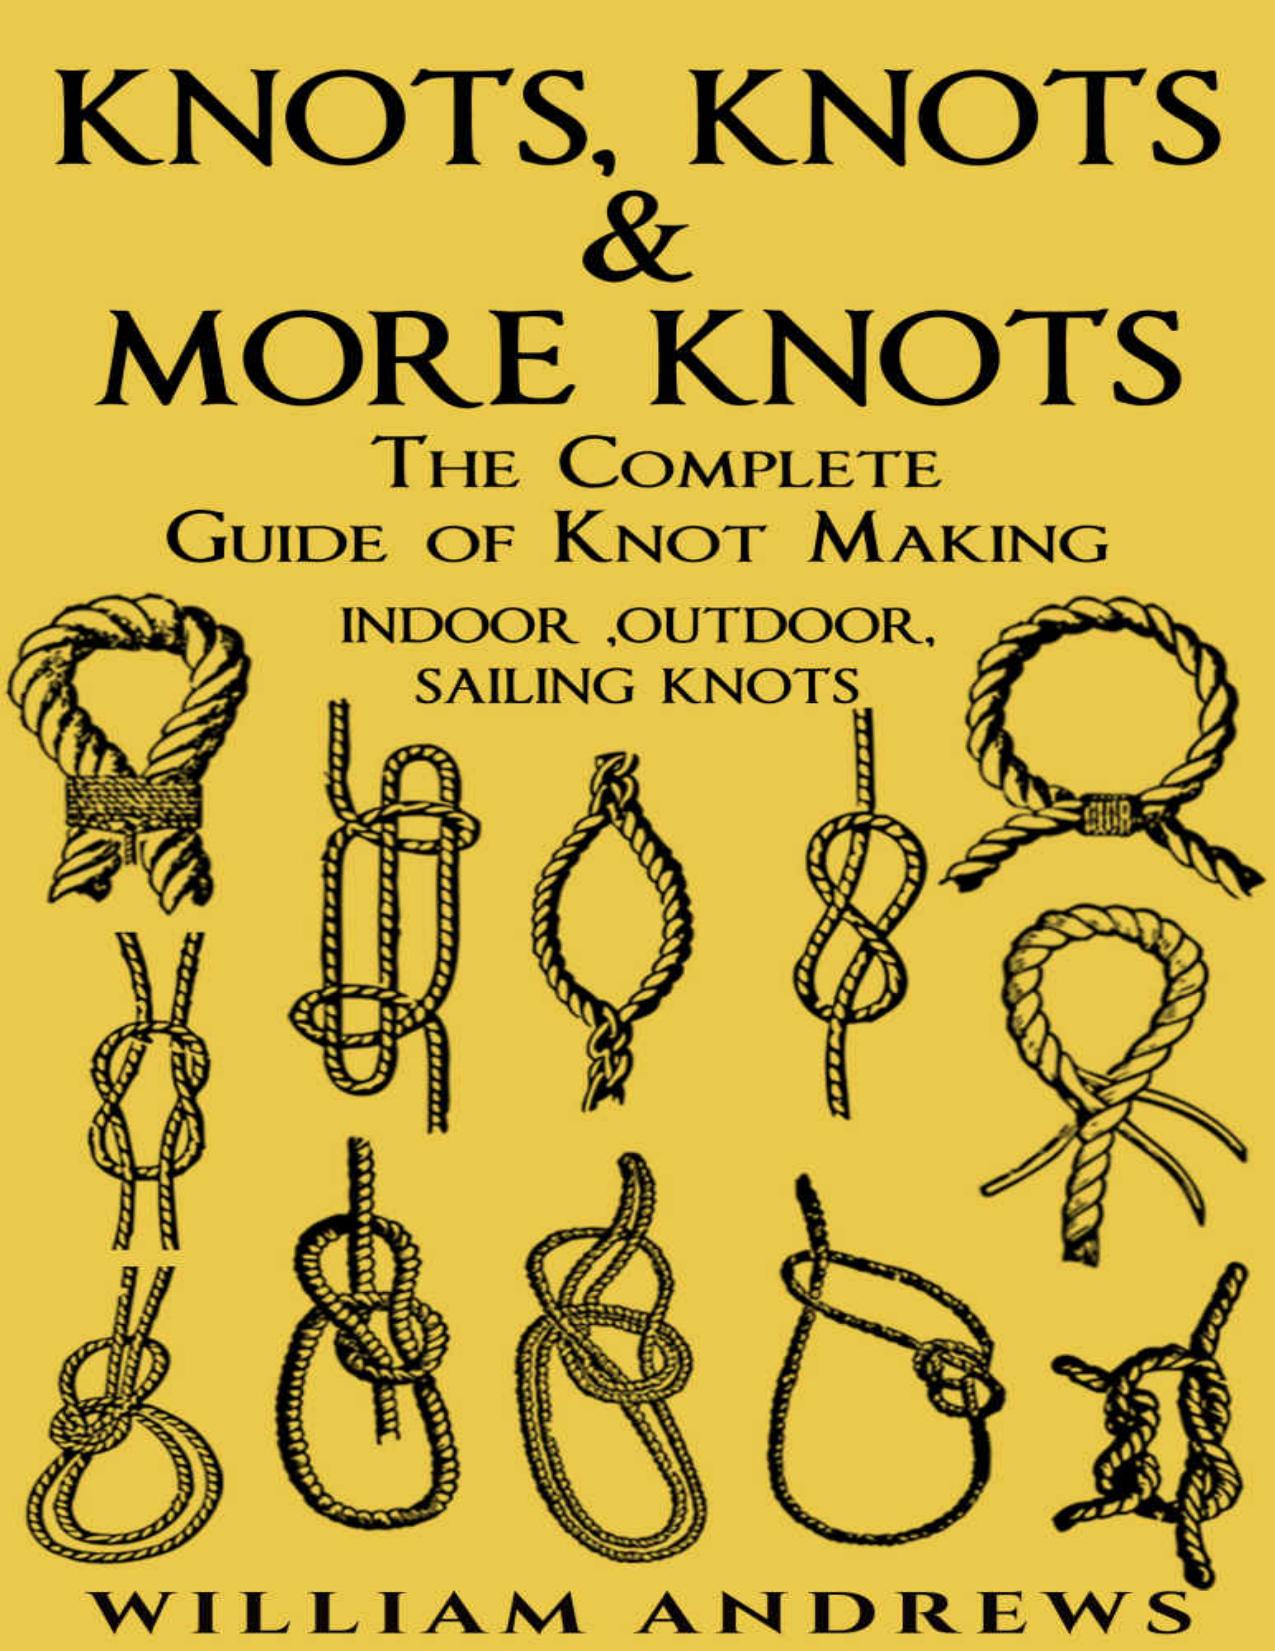 Knots: The Complete Guide Of Knots- Indoor Knots, Outdoor Knots And Sailbot Knots (Knot Tying, Splicing , Ropework,Macrame Book 1) by Williams Andrew